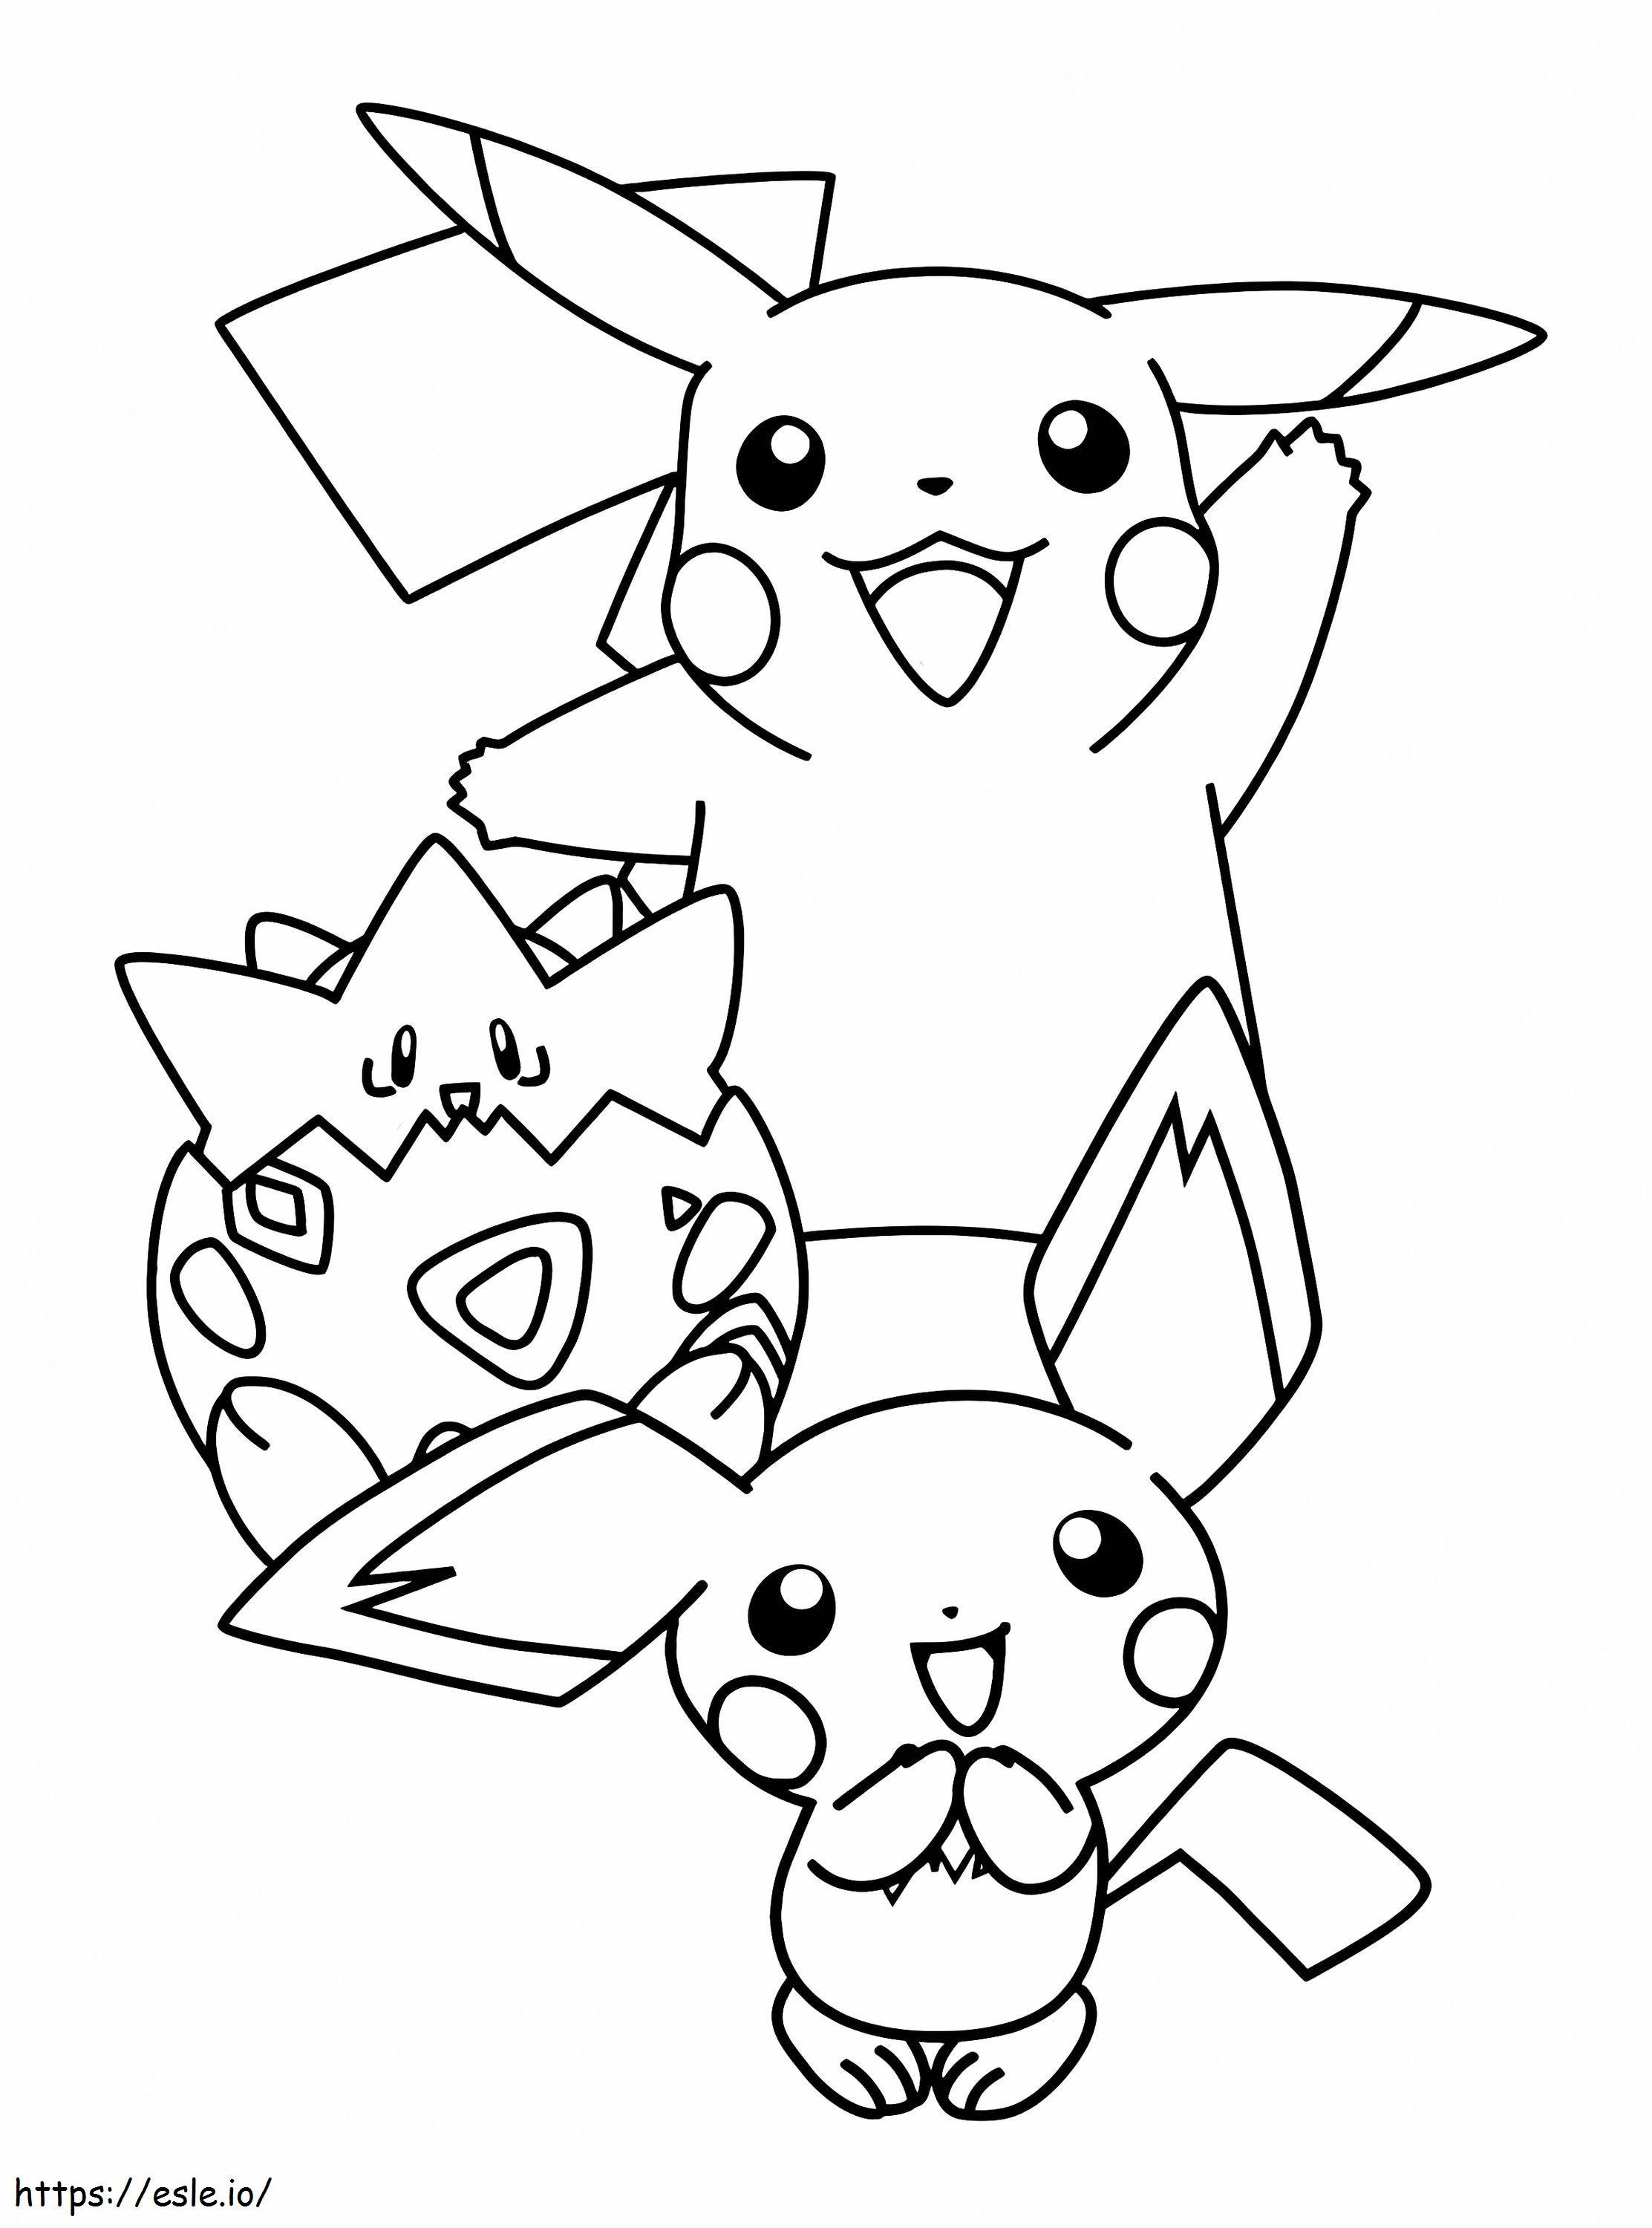 Pichu And Friends coloring page